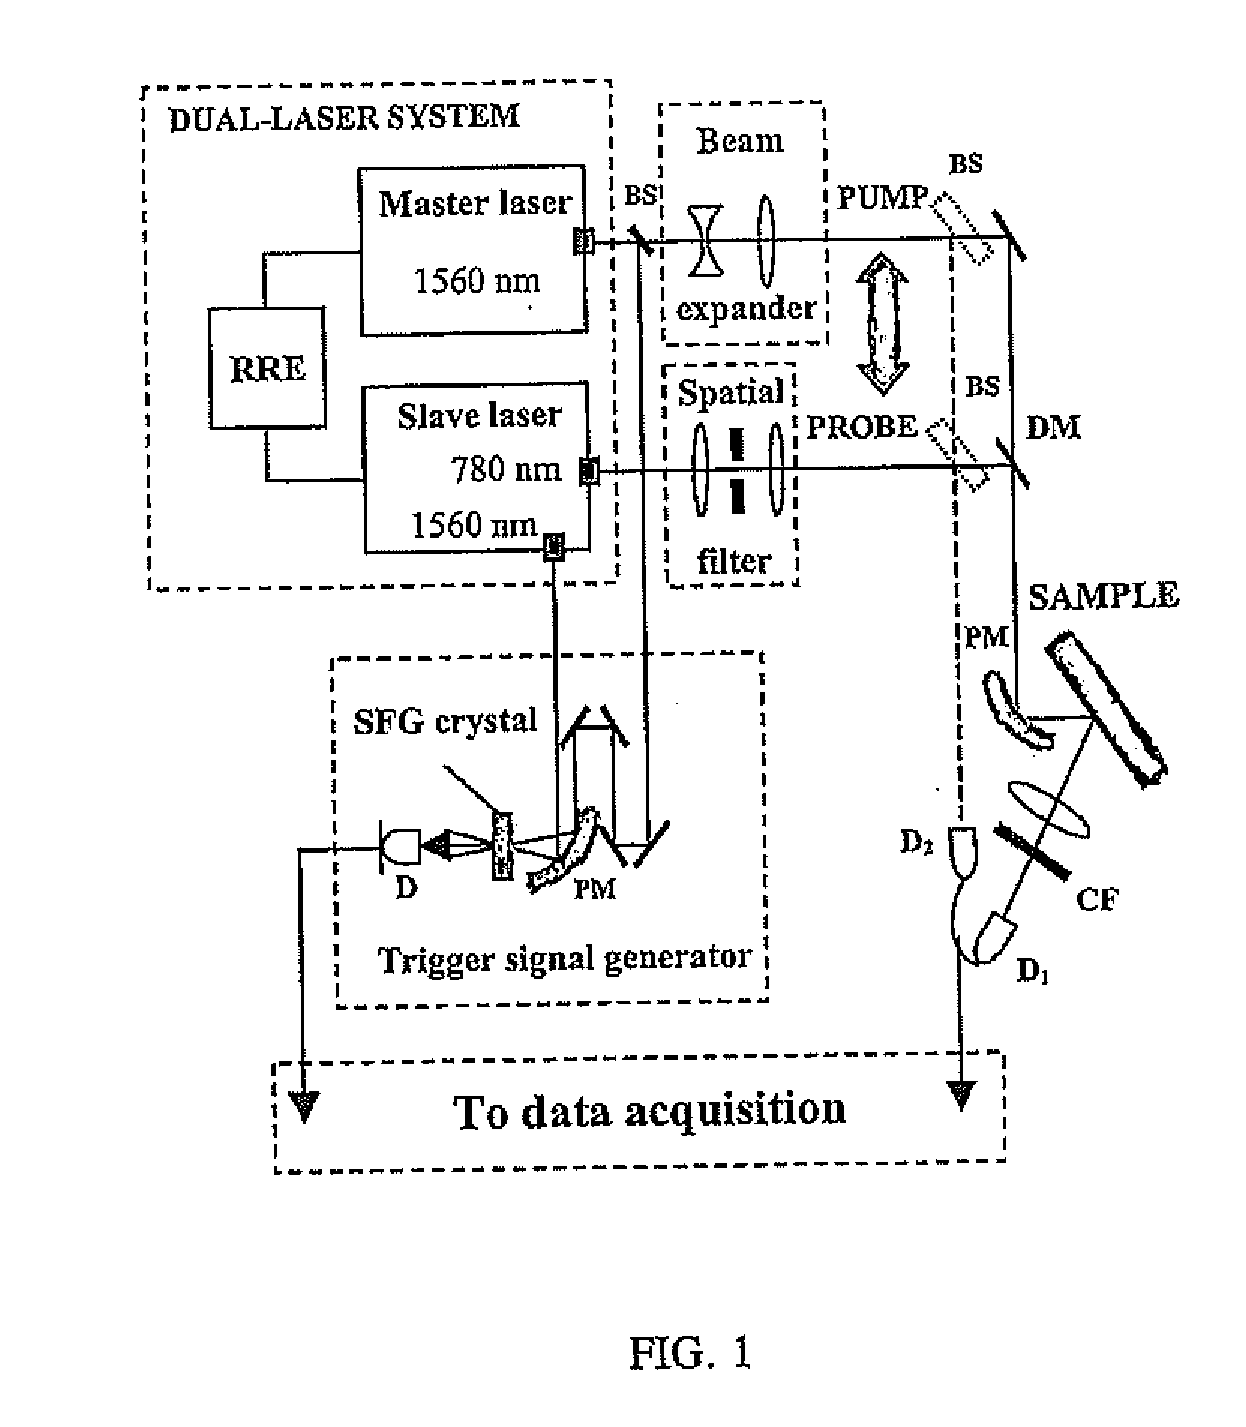 Method and system for measuring at least one property including a magnetic property of a material using pulsed laser sources